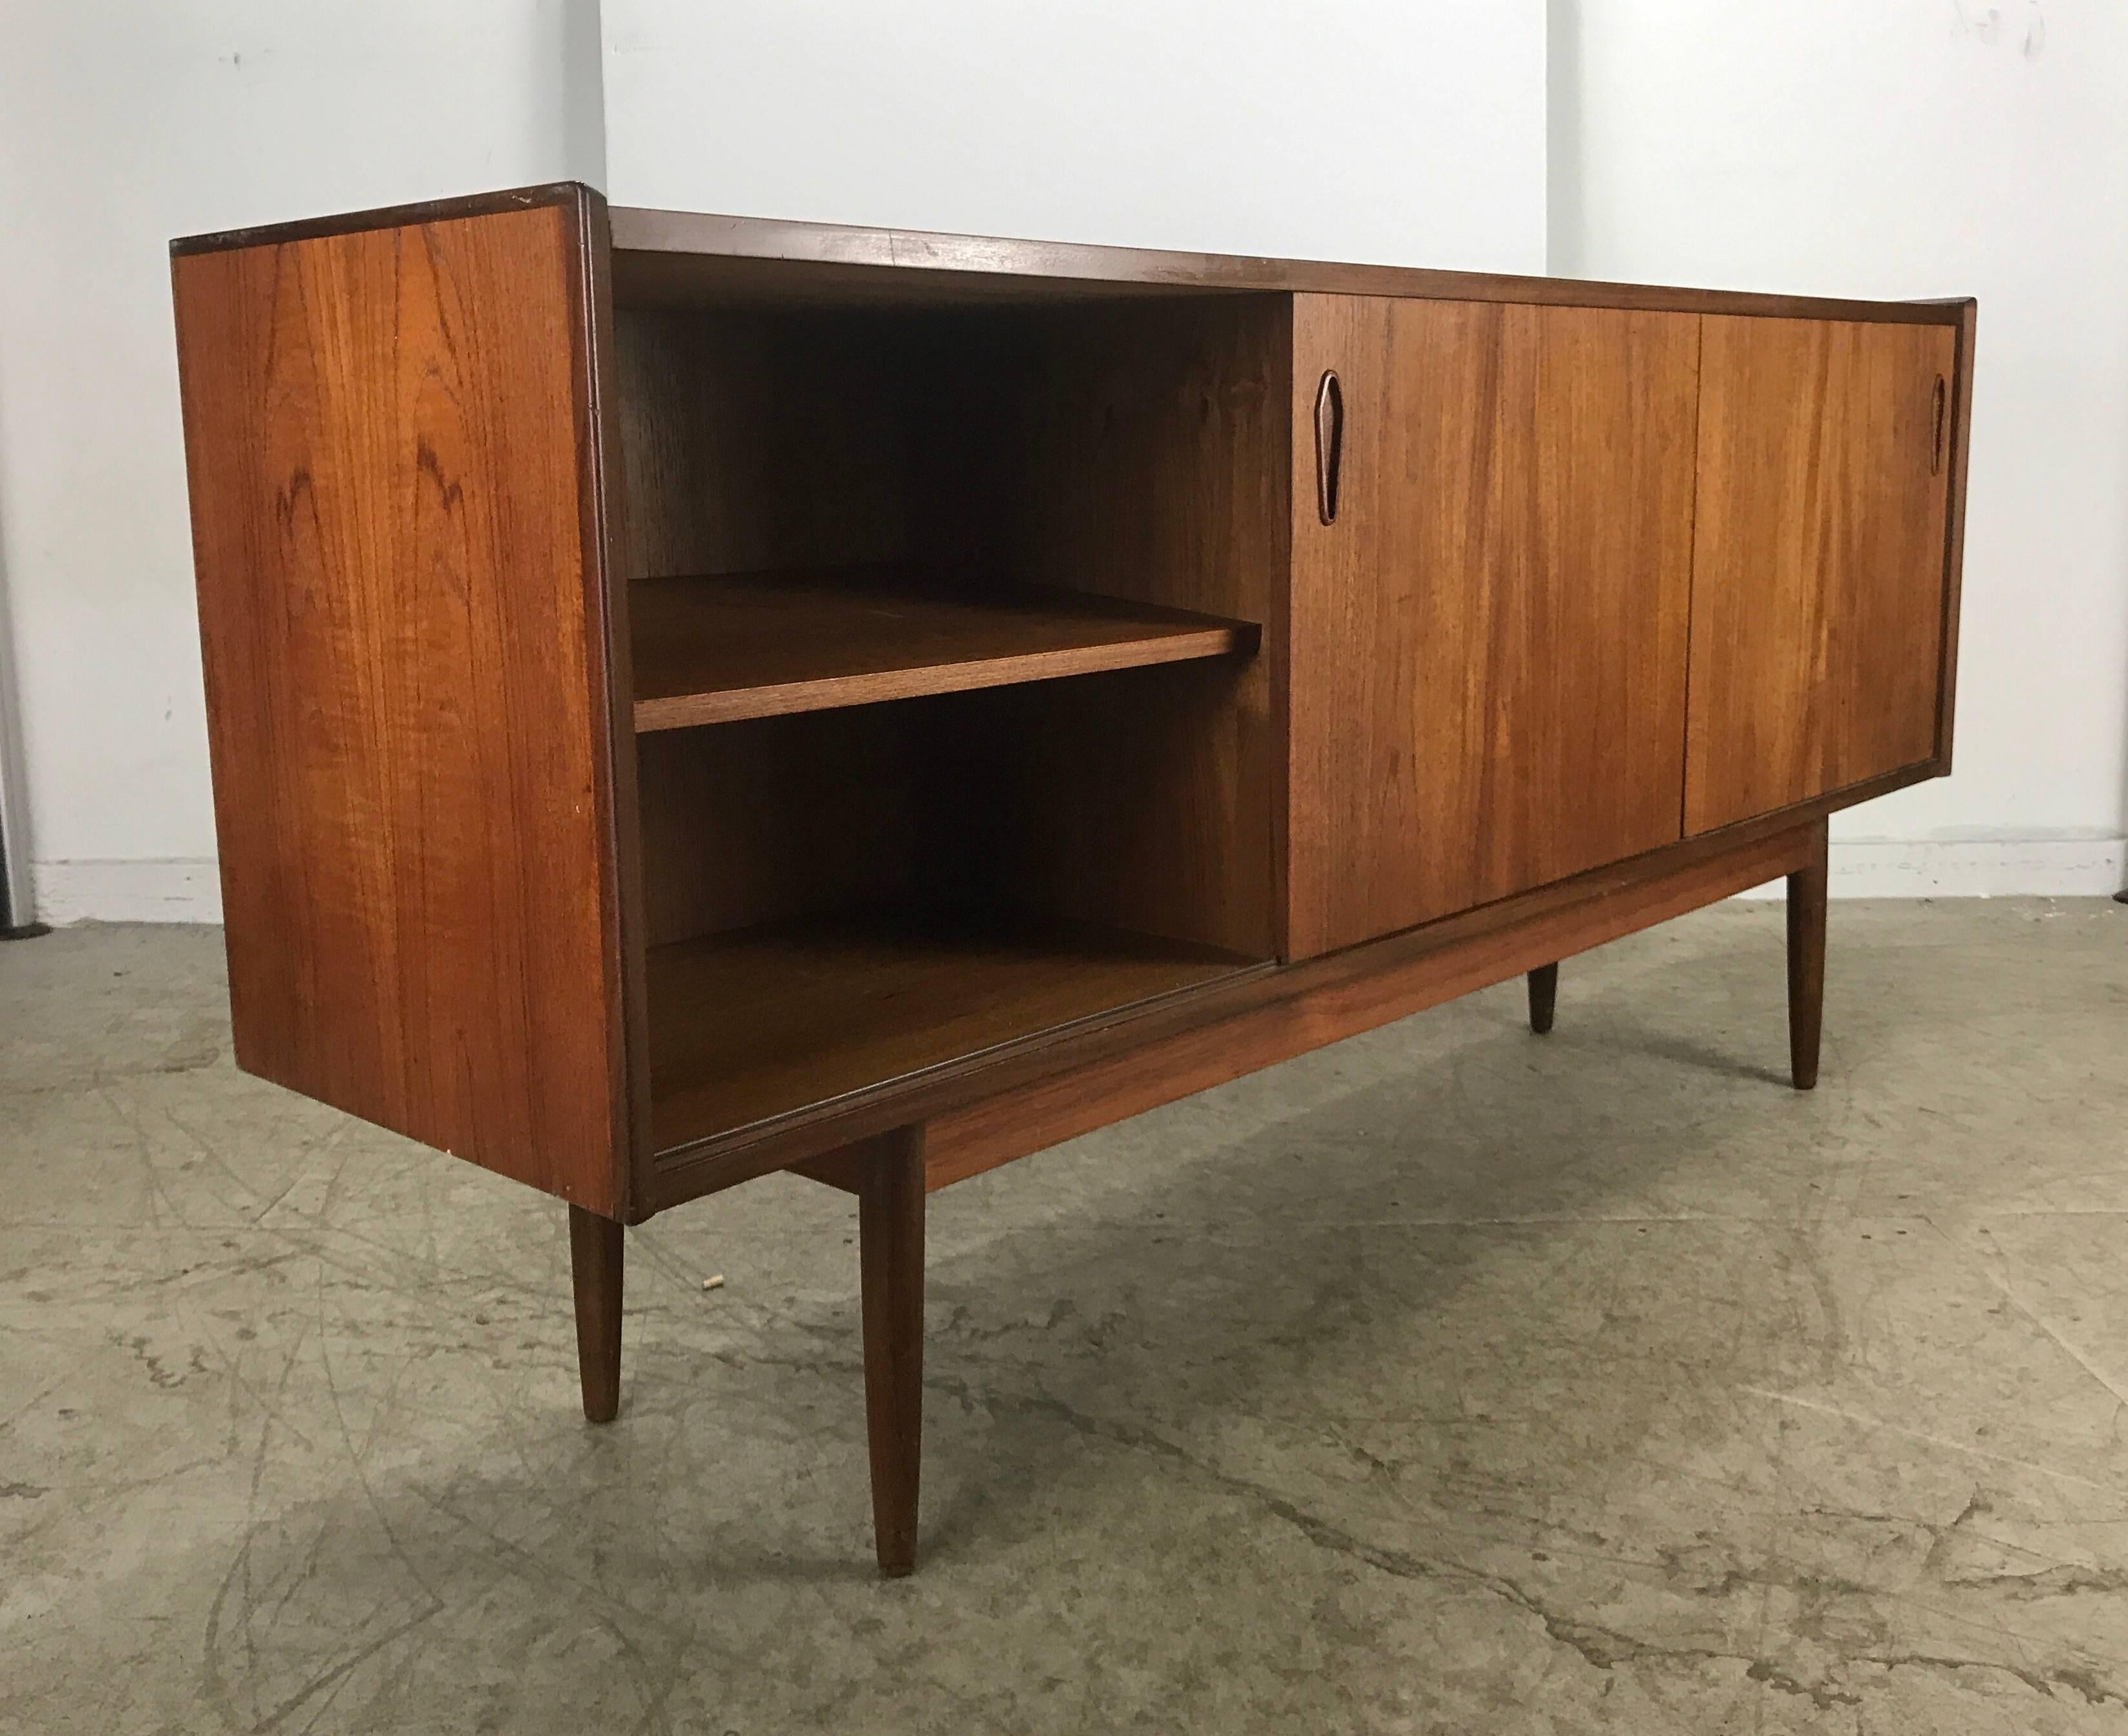 Classic Danish modern credenza/sideboard, figured walnut, stunning rosewood trim detail. Attributed to Arne Vodder. Left and right sliding doors, shelves, unusual coffin shape finger pulls, five drawers birch interior, superior quality and